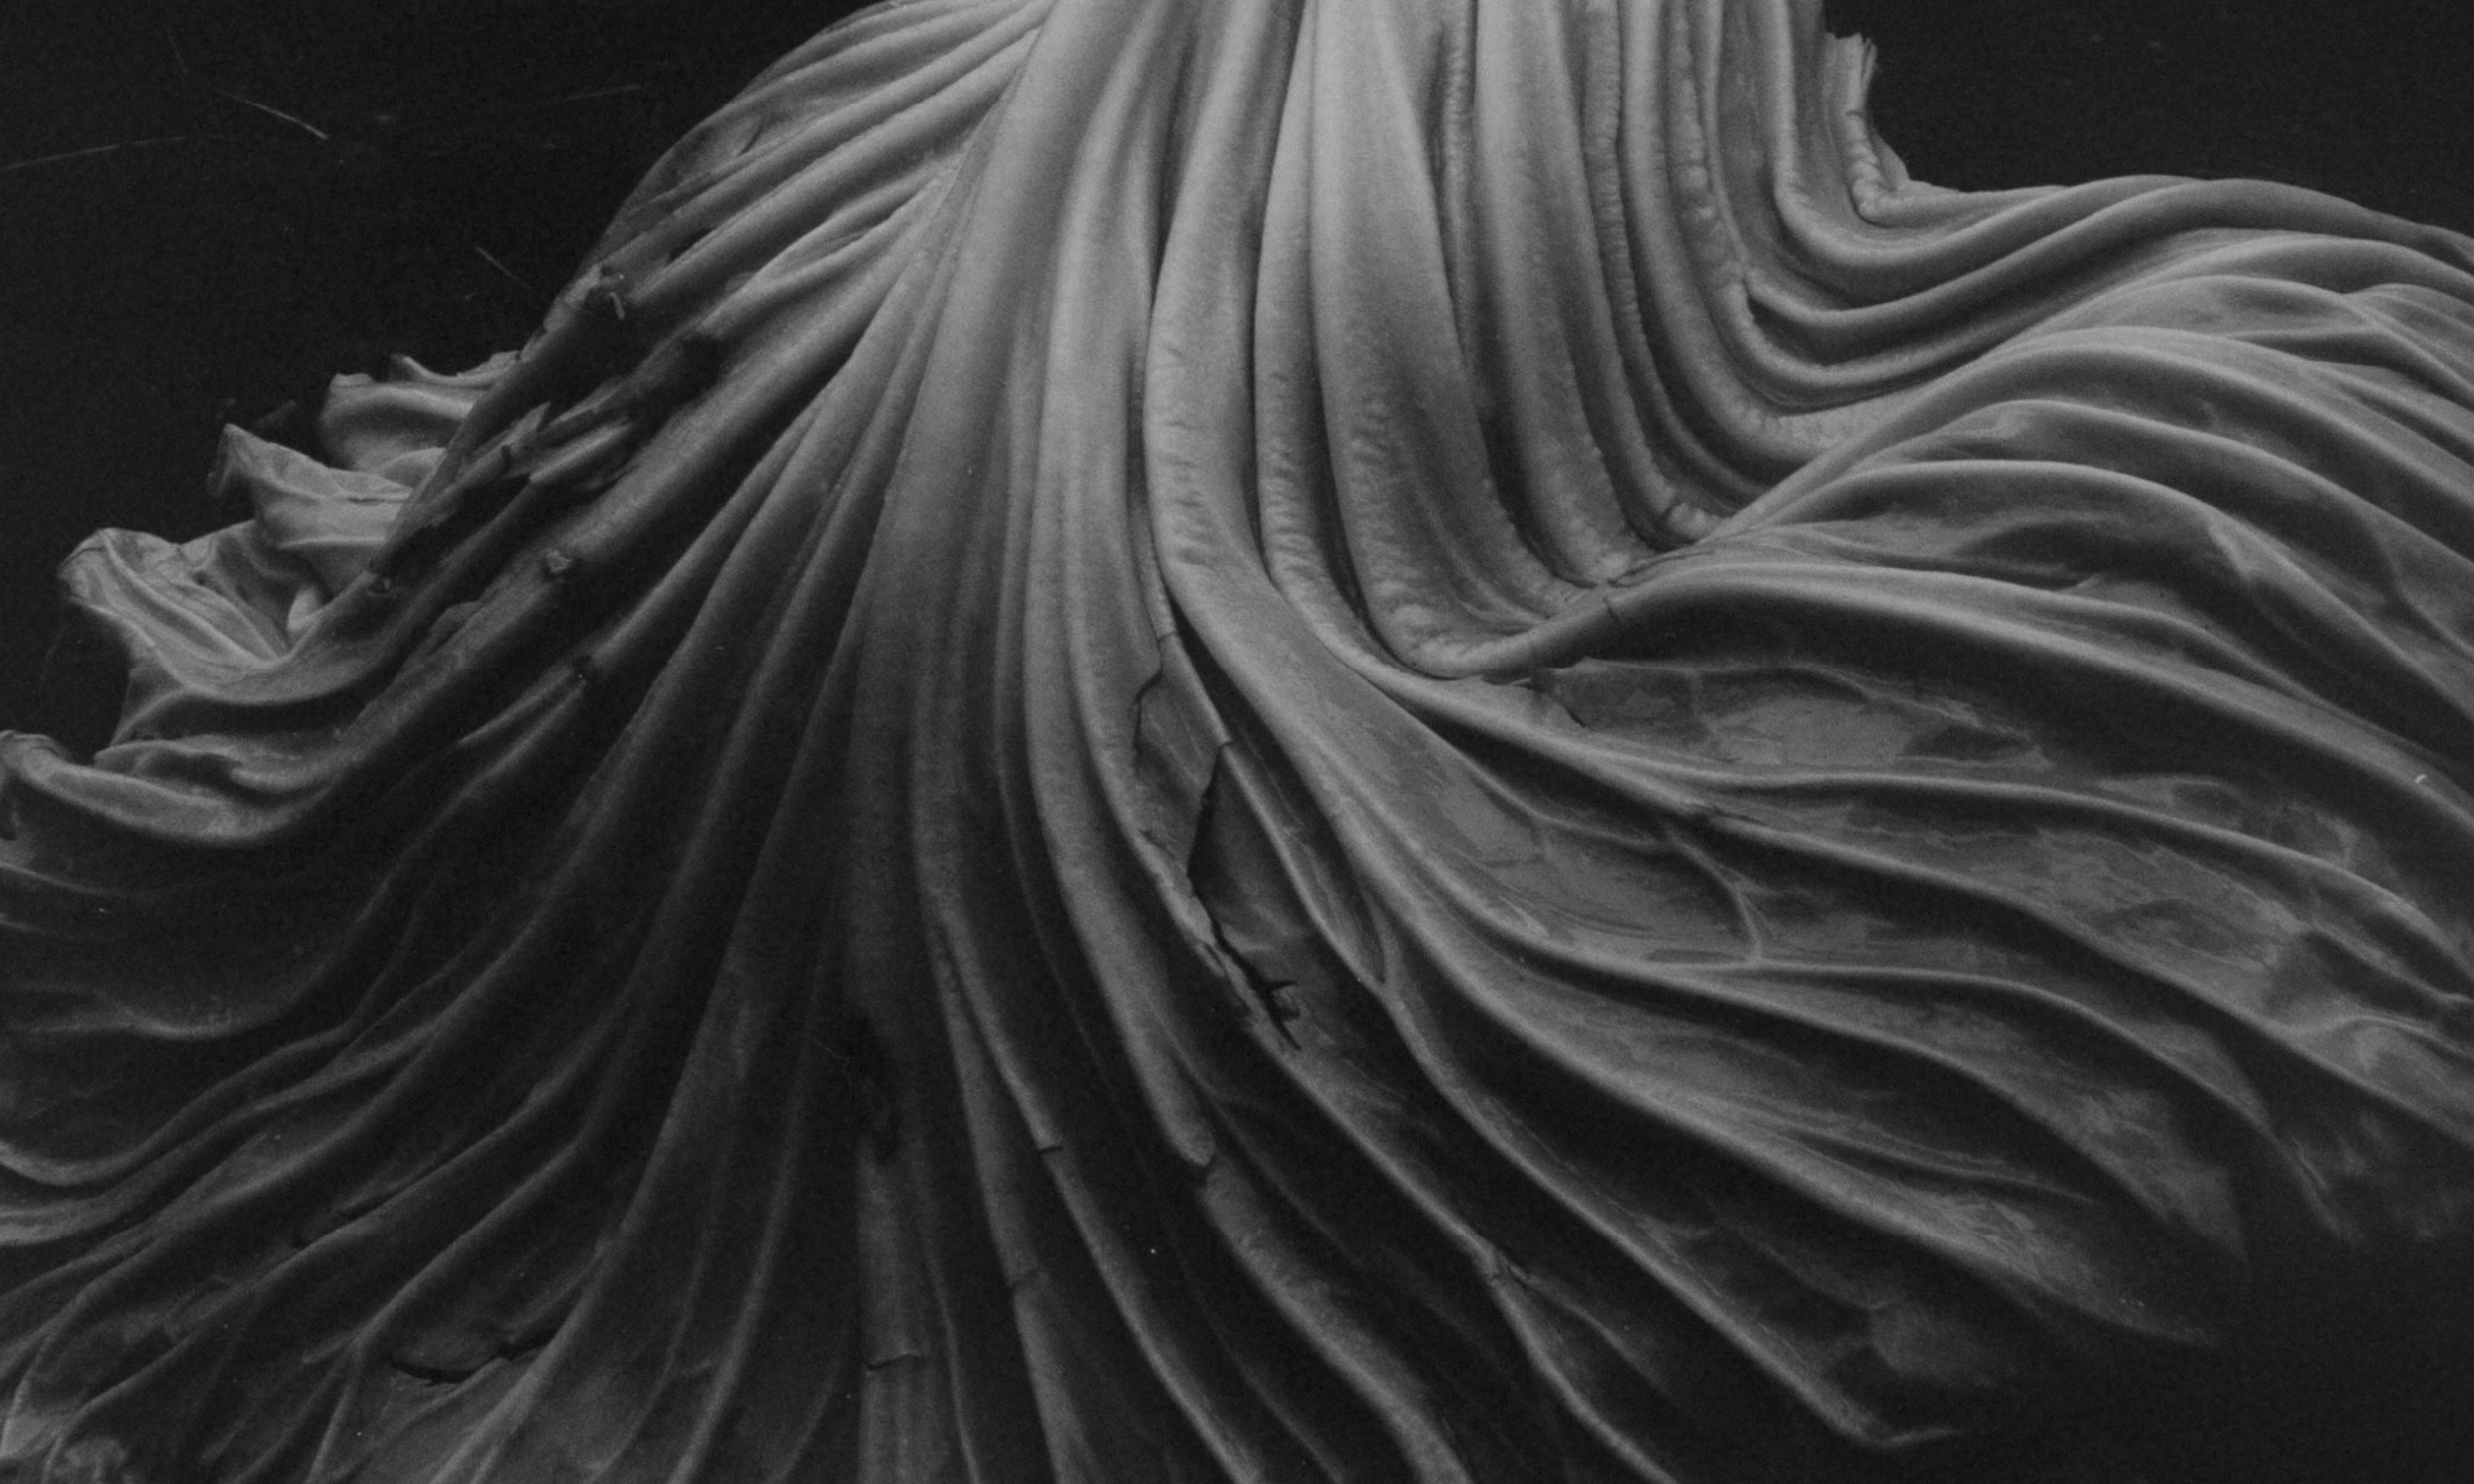 The Greats: How Edward Weston Pushed Photography into Modernity